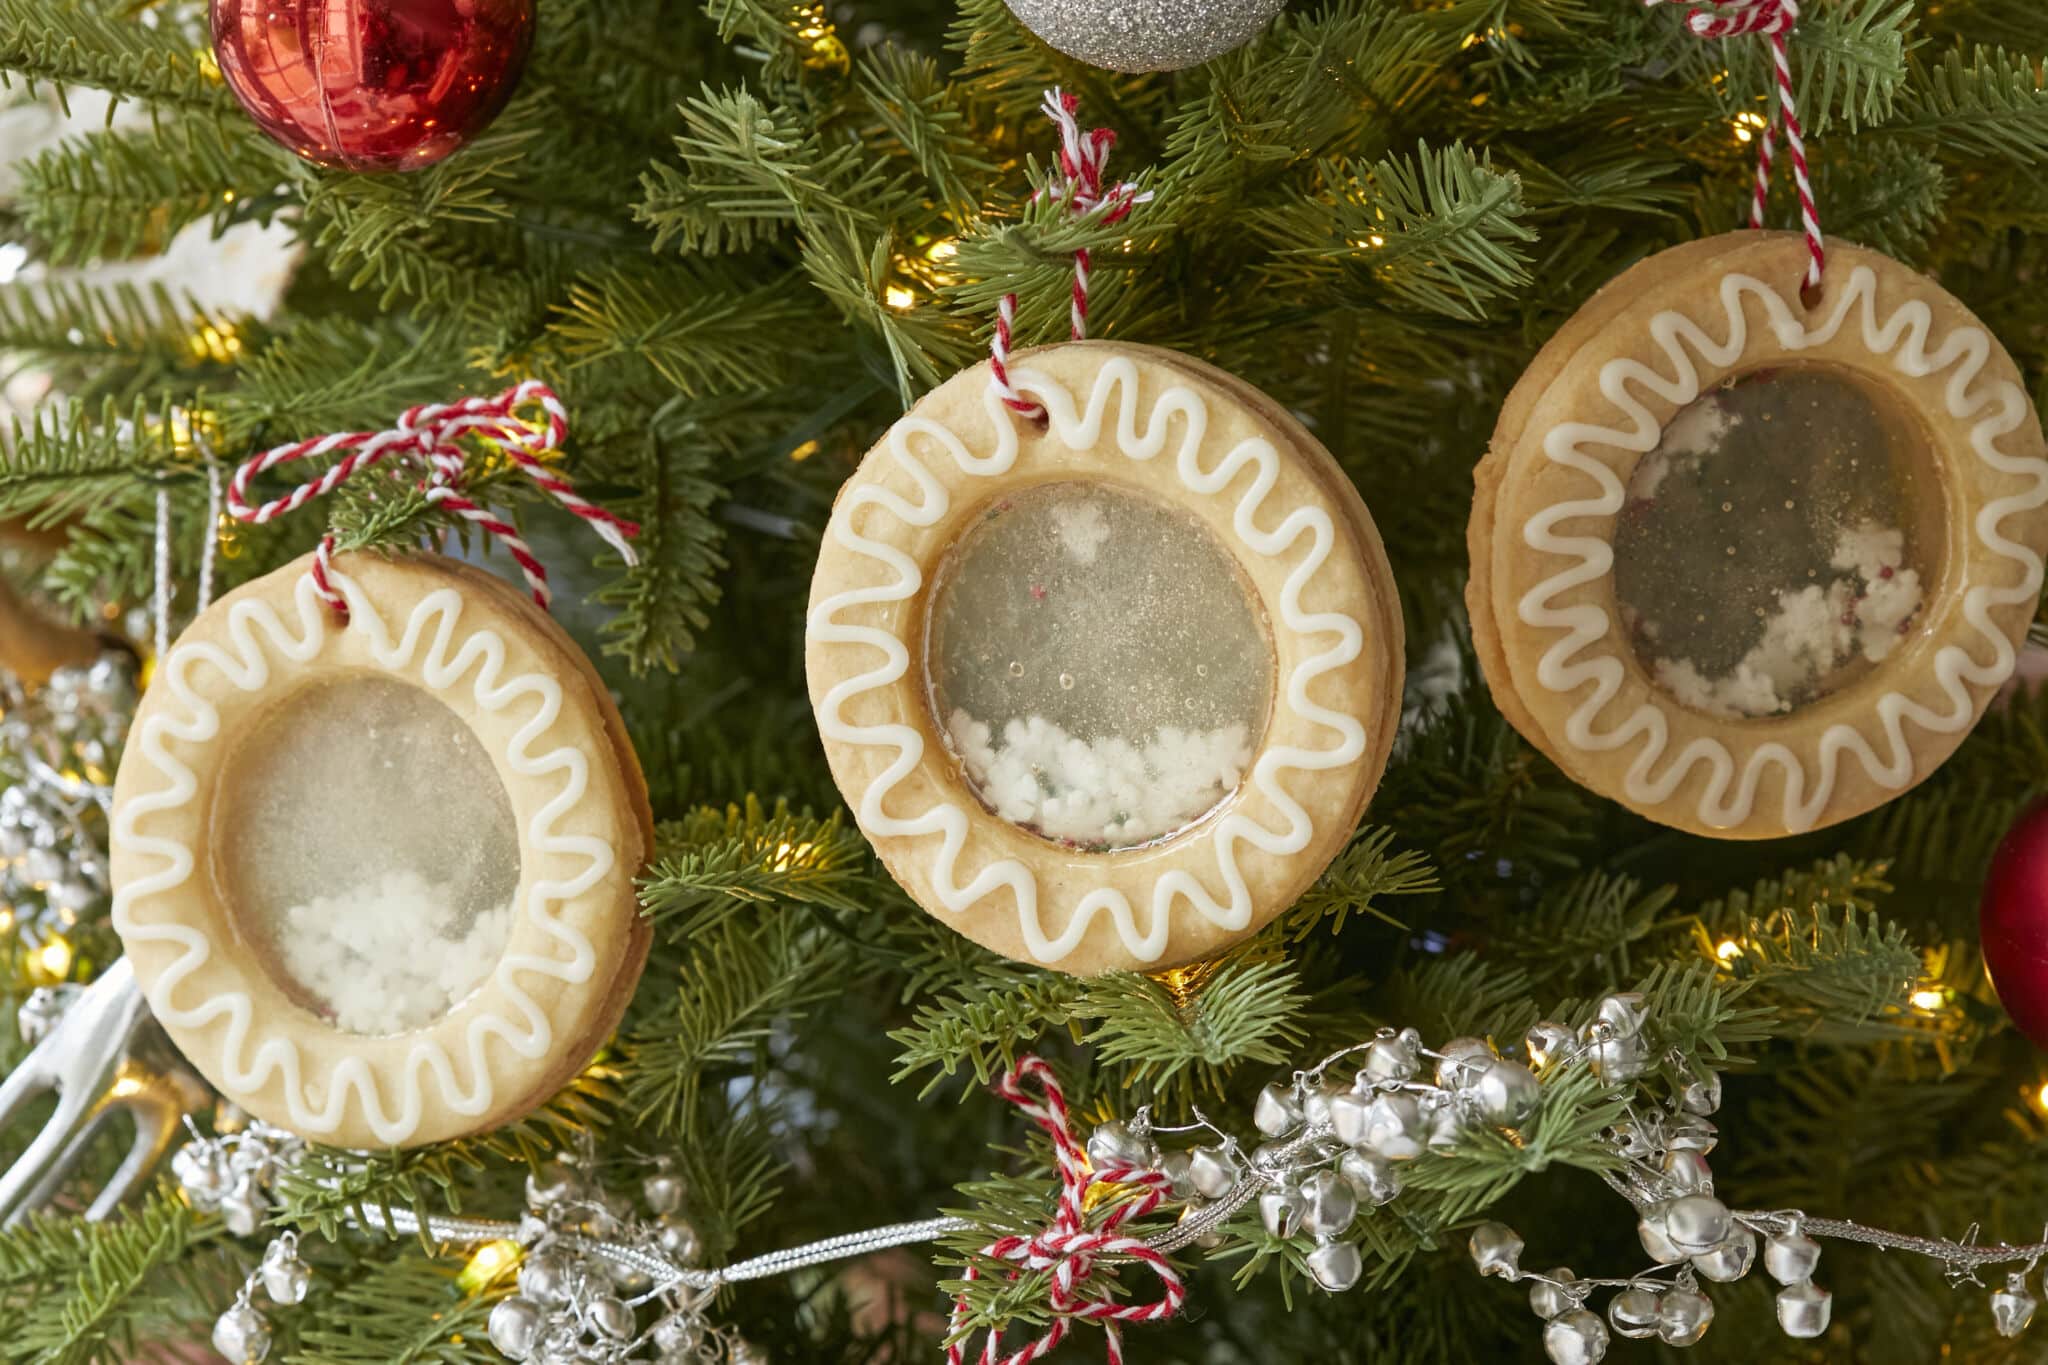 These ornament ice molds are the CUTEST way to elevate your